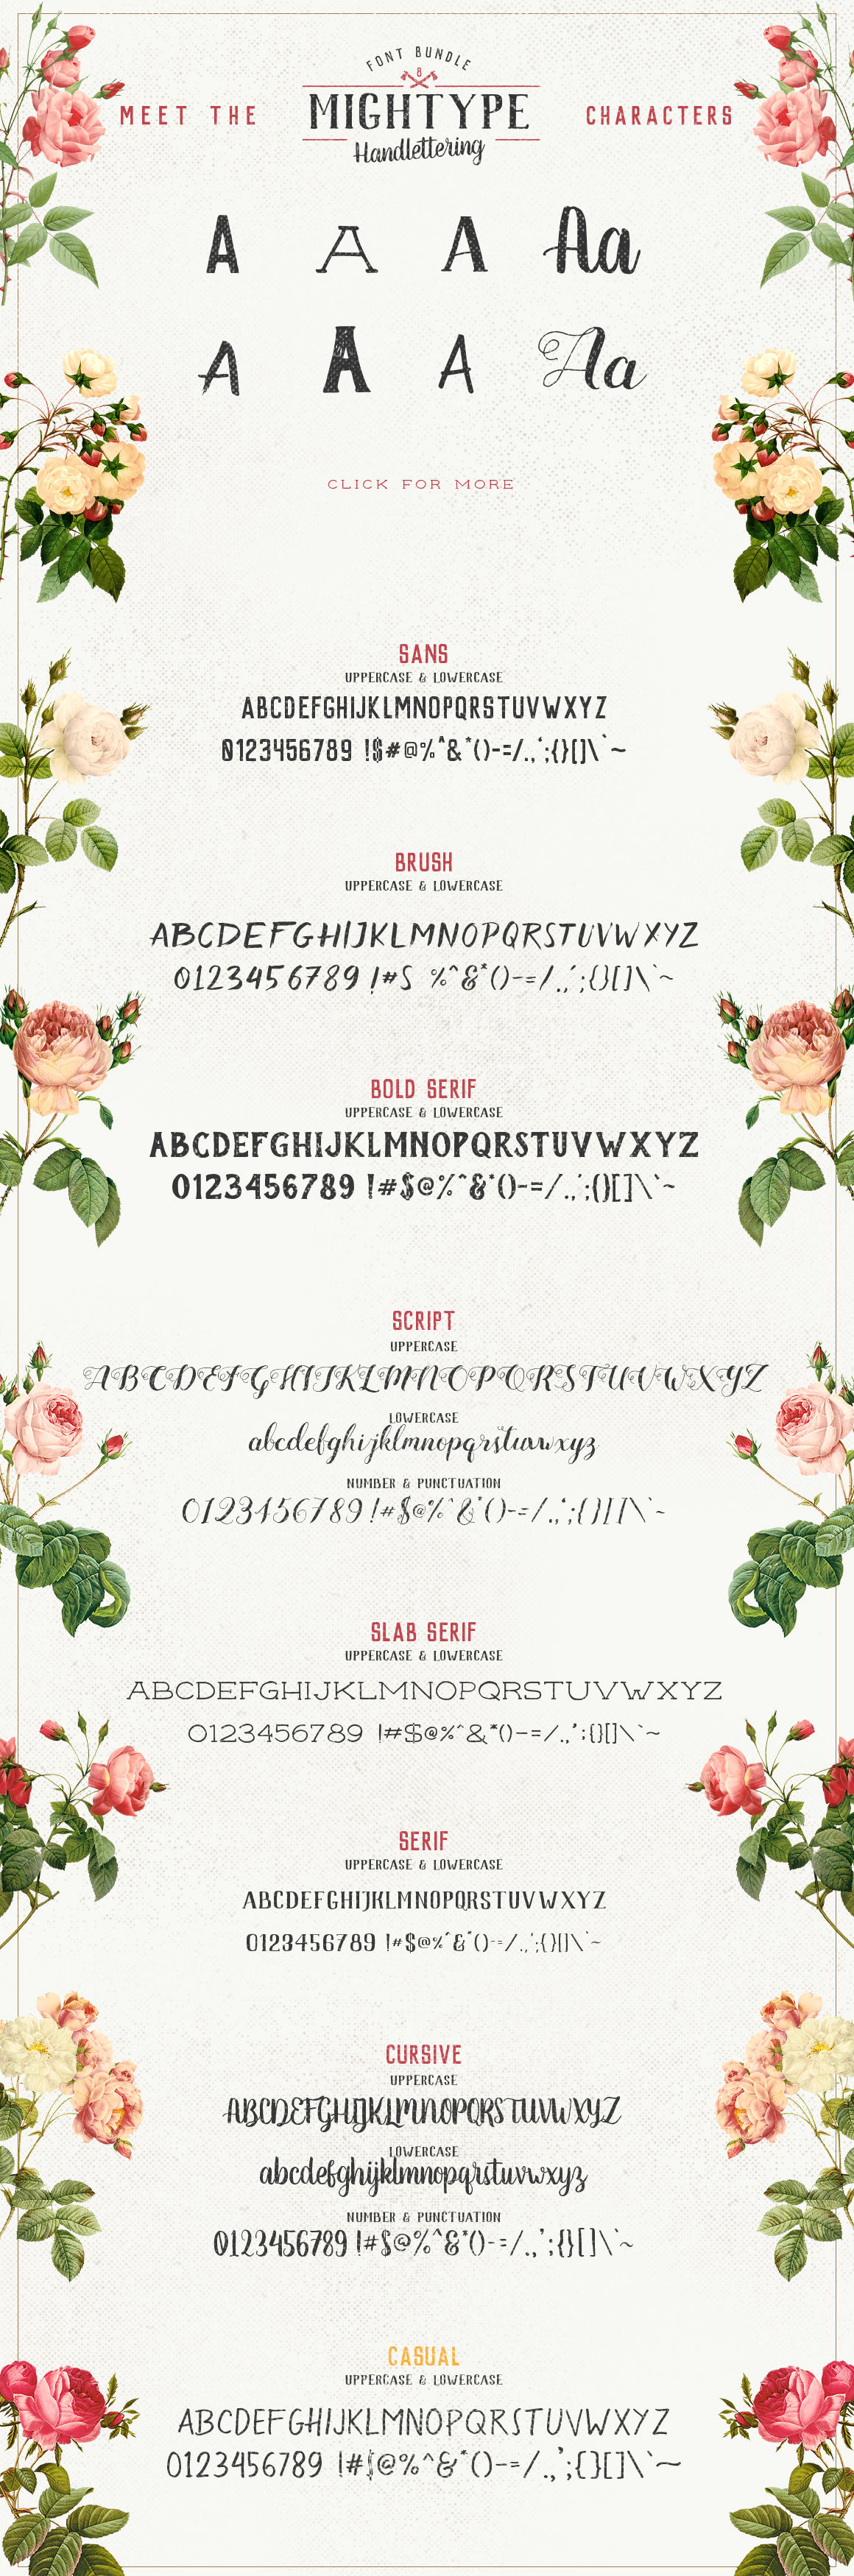 Mightype Handlettering Font Pack By Af Studio Thehungryjpeg Com